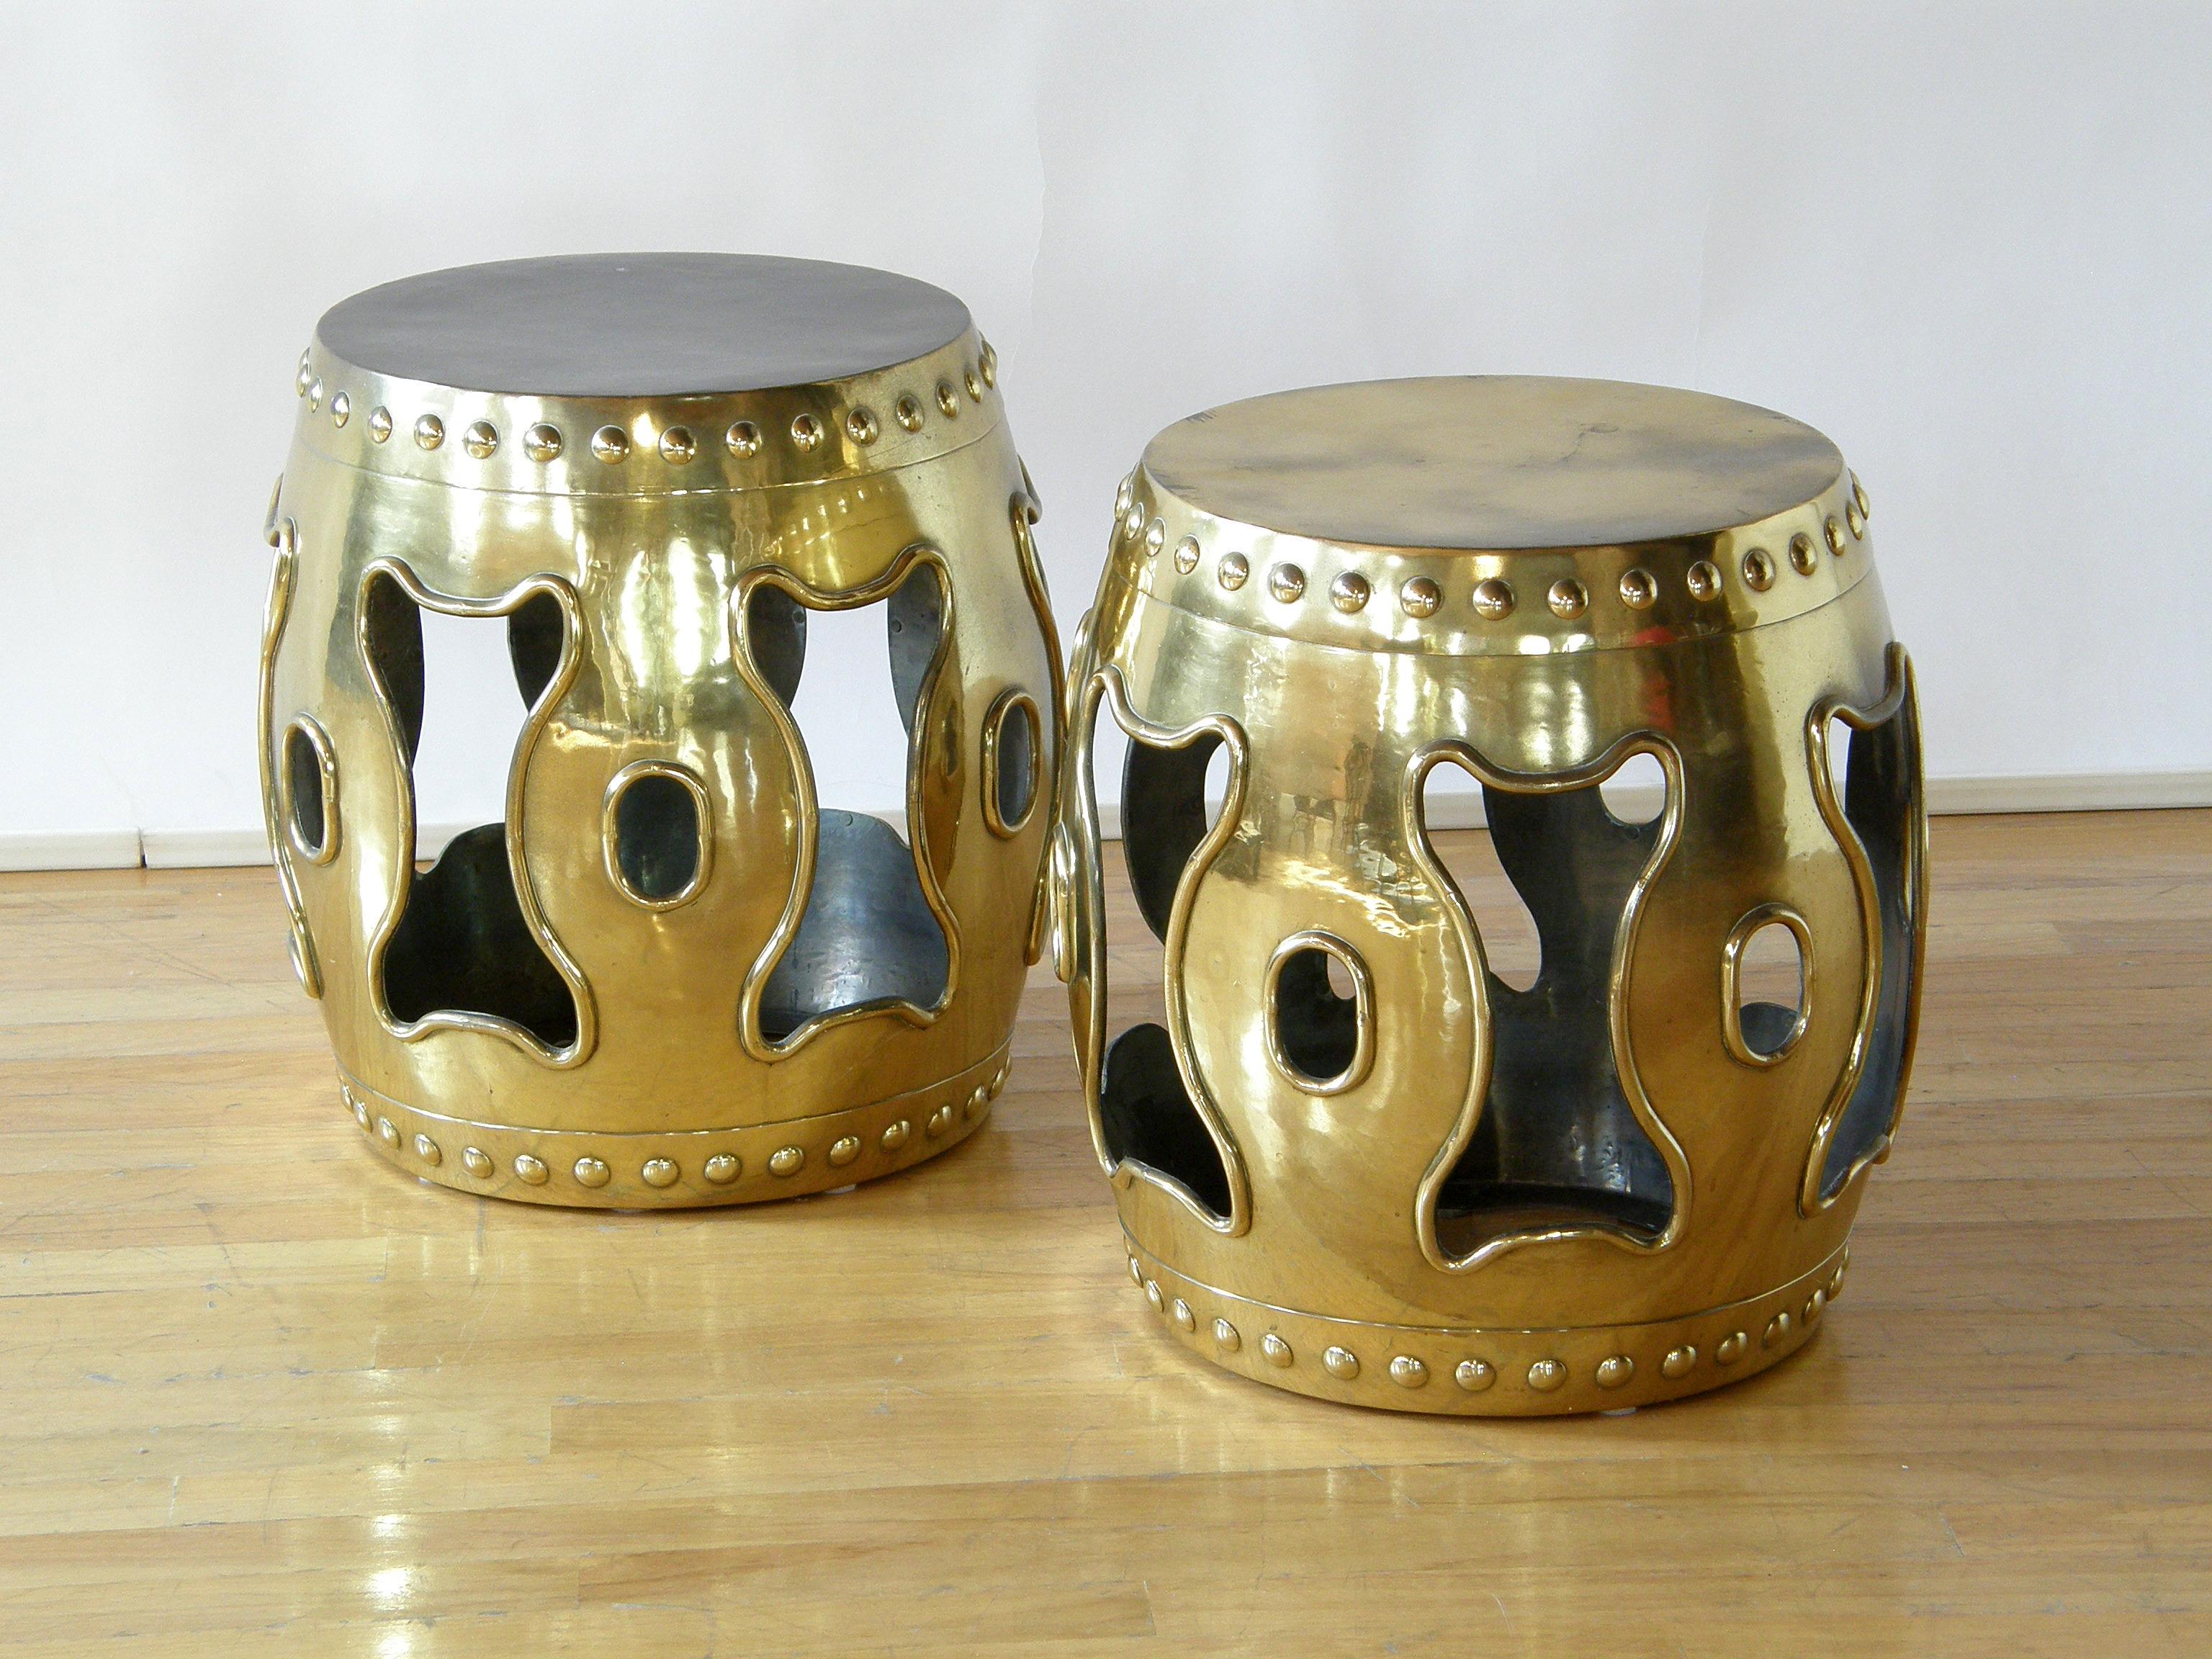 This pair of brass garden stools are designed after traditional Chinese garden stools. The shape imitates a Chinese drum with decorative, faux nailheads edging the top and bottom to simulate the attachment of the drumheads. The piercings on the